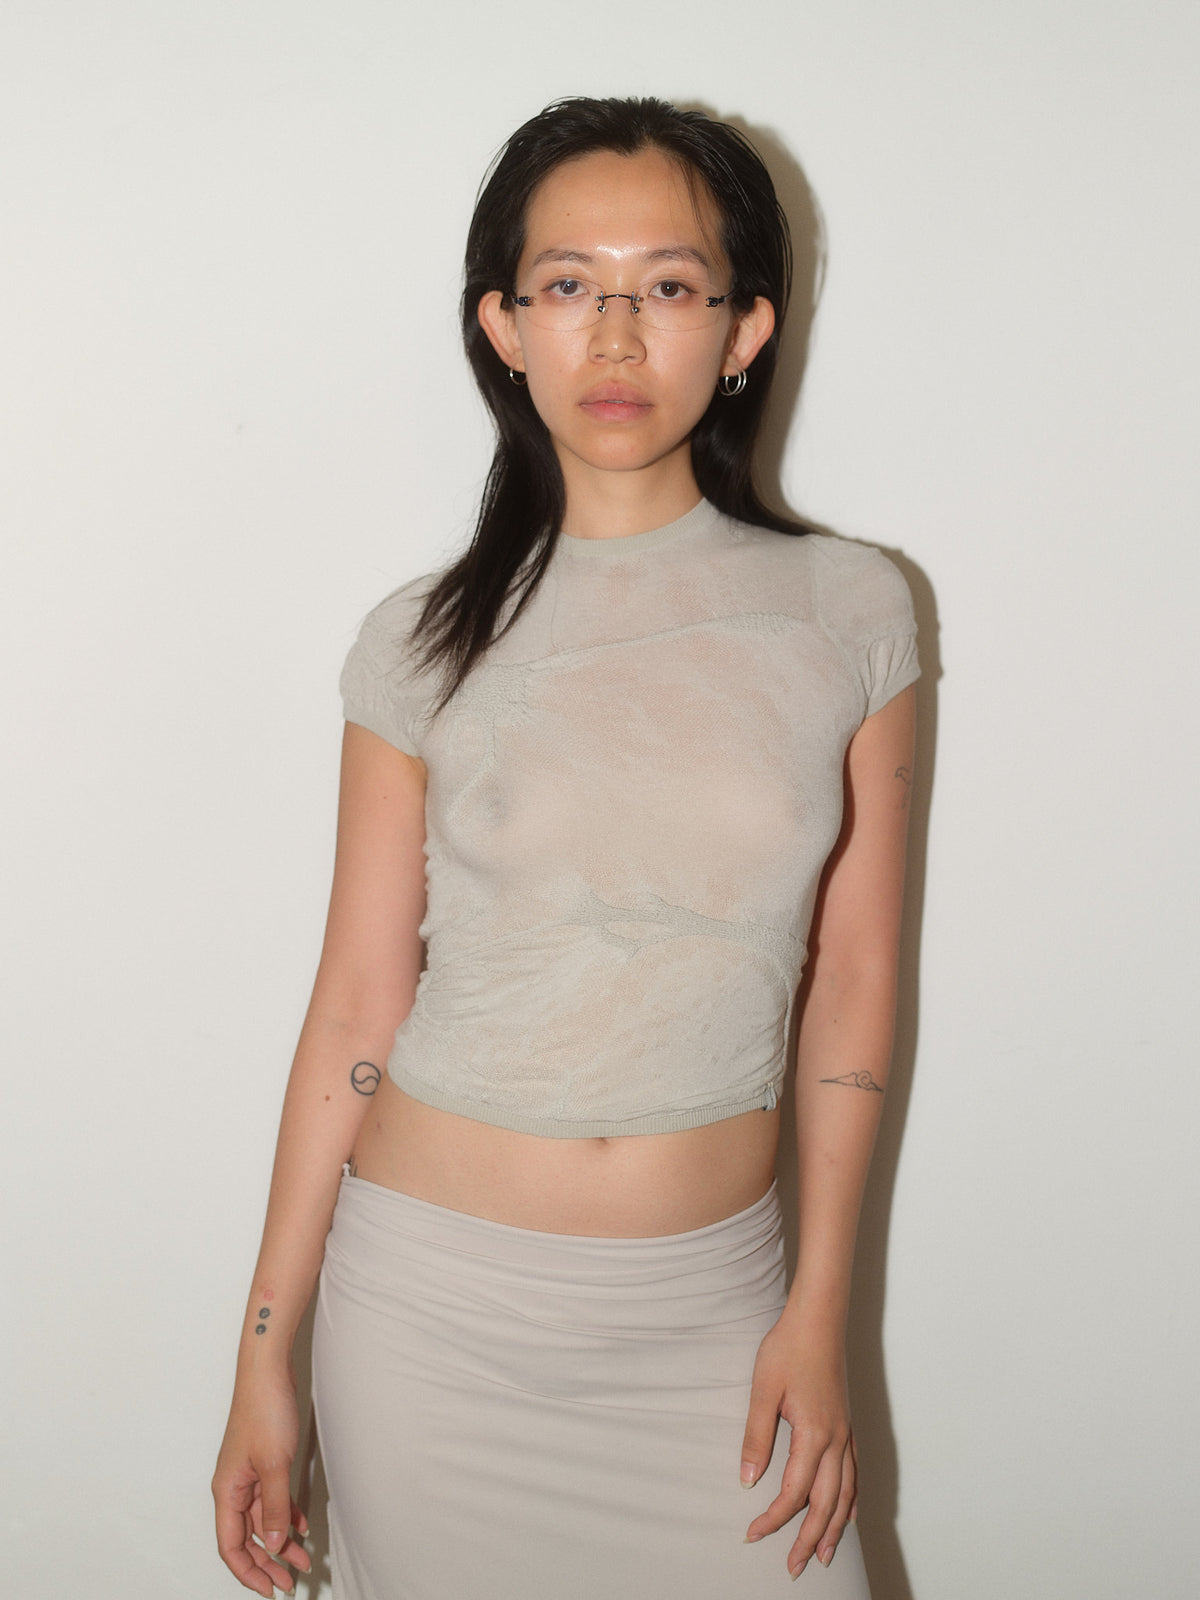 Knitted Sheer T-Shirt designed by Christina Seewald. Sustainable, designed and made in Europe. Best Quality Yarns from Italy.